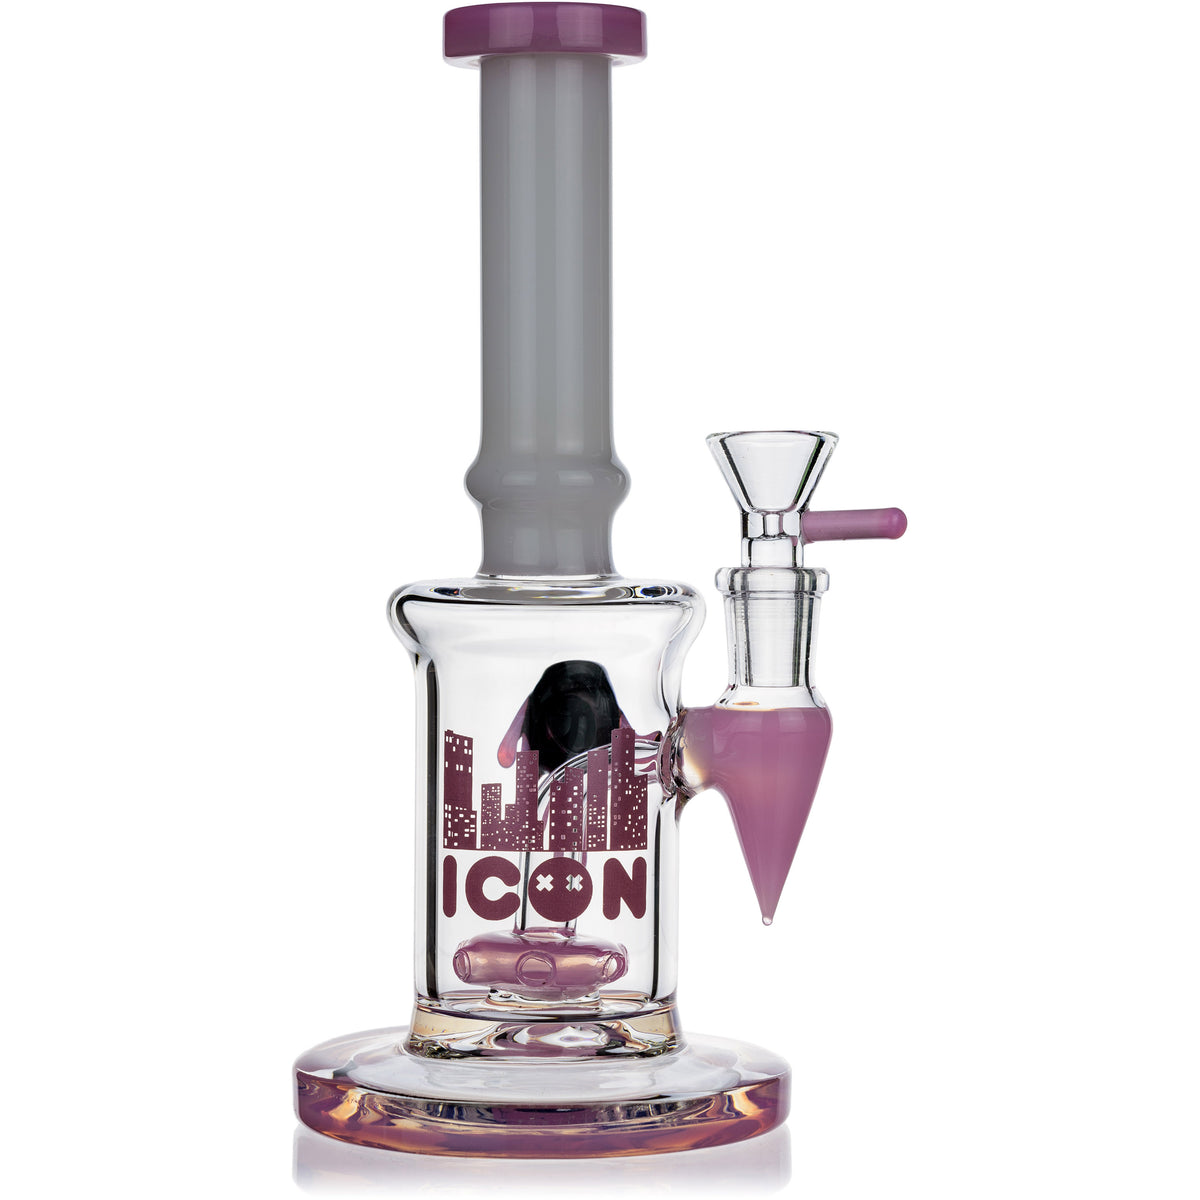 Dreamcatcher Rig, by ICON Glass (free banger included) - BKRY Inc.